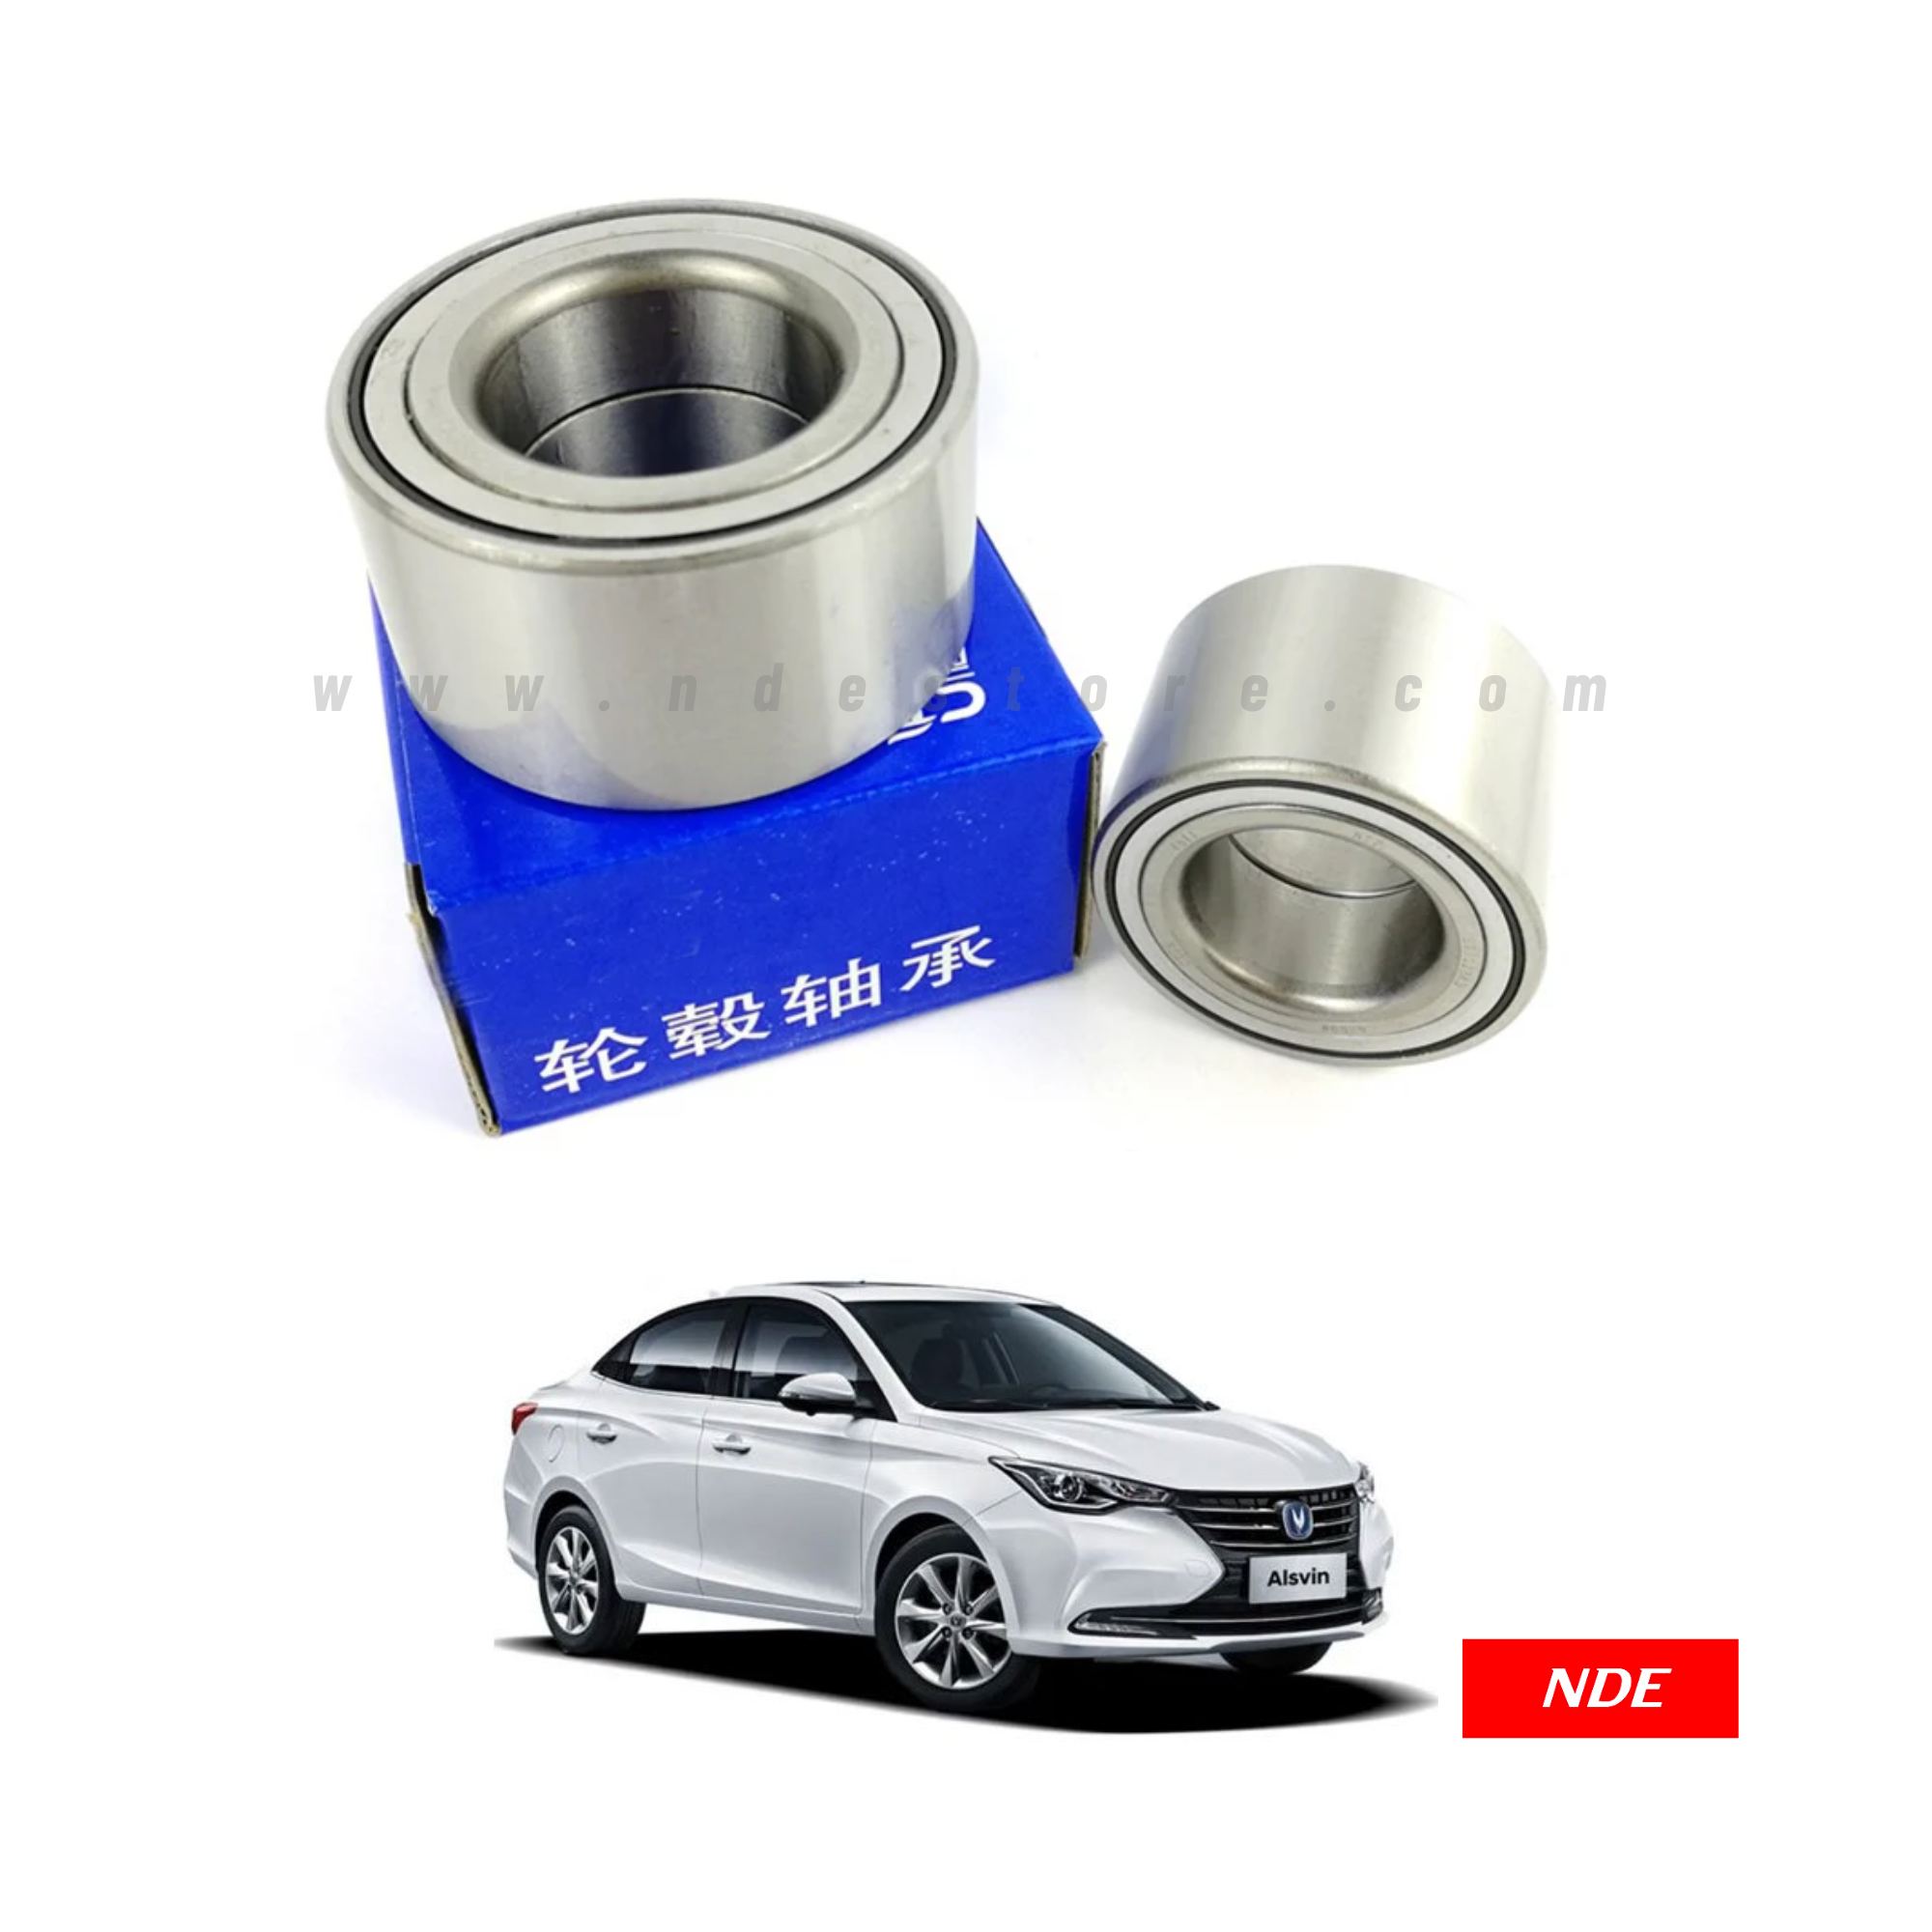 WHEEL BEARING FRONT FOR CHANGAN ALSVIN